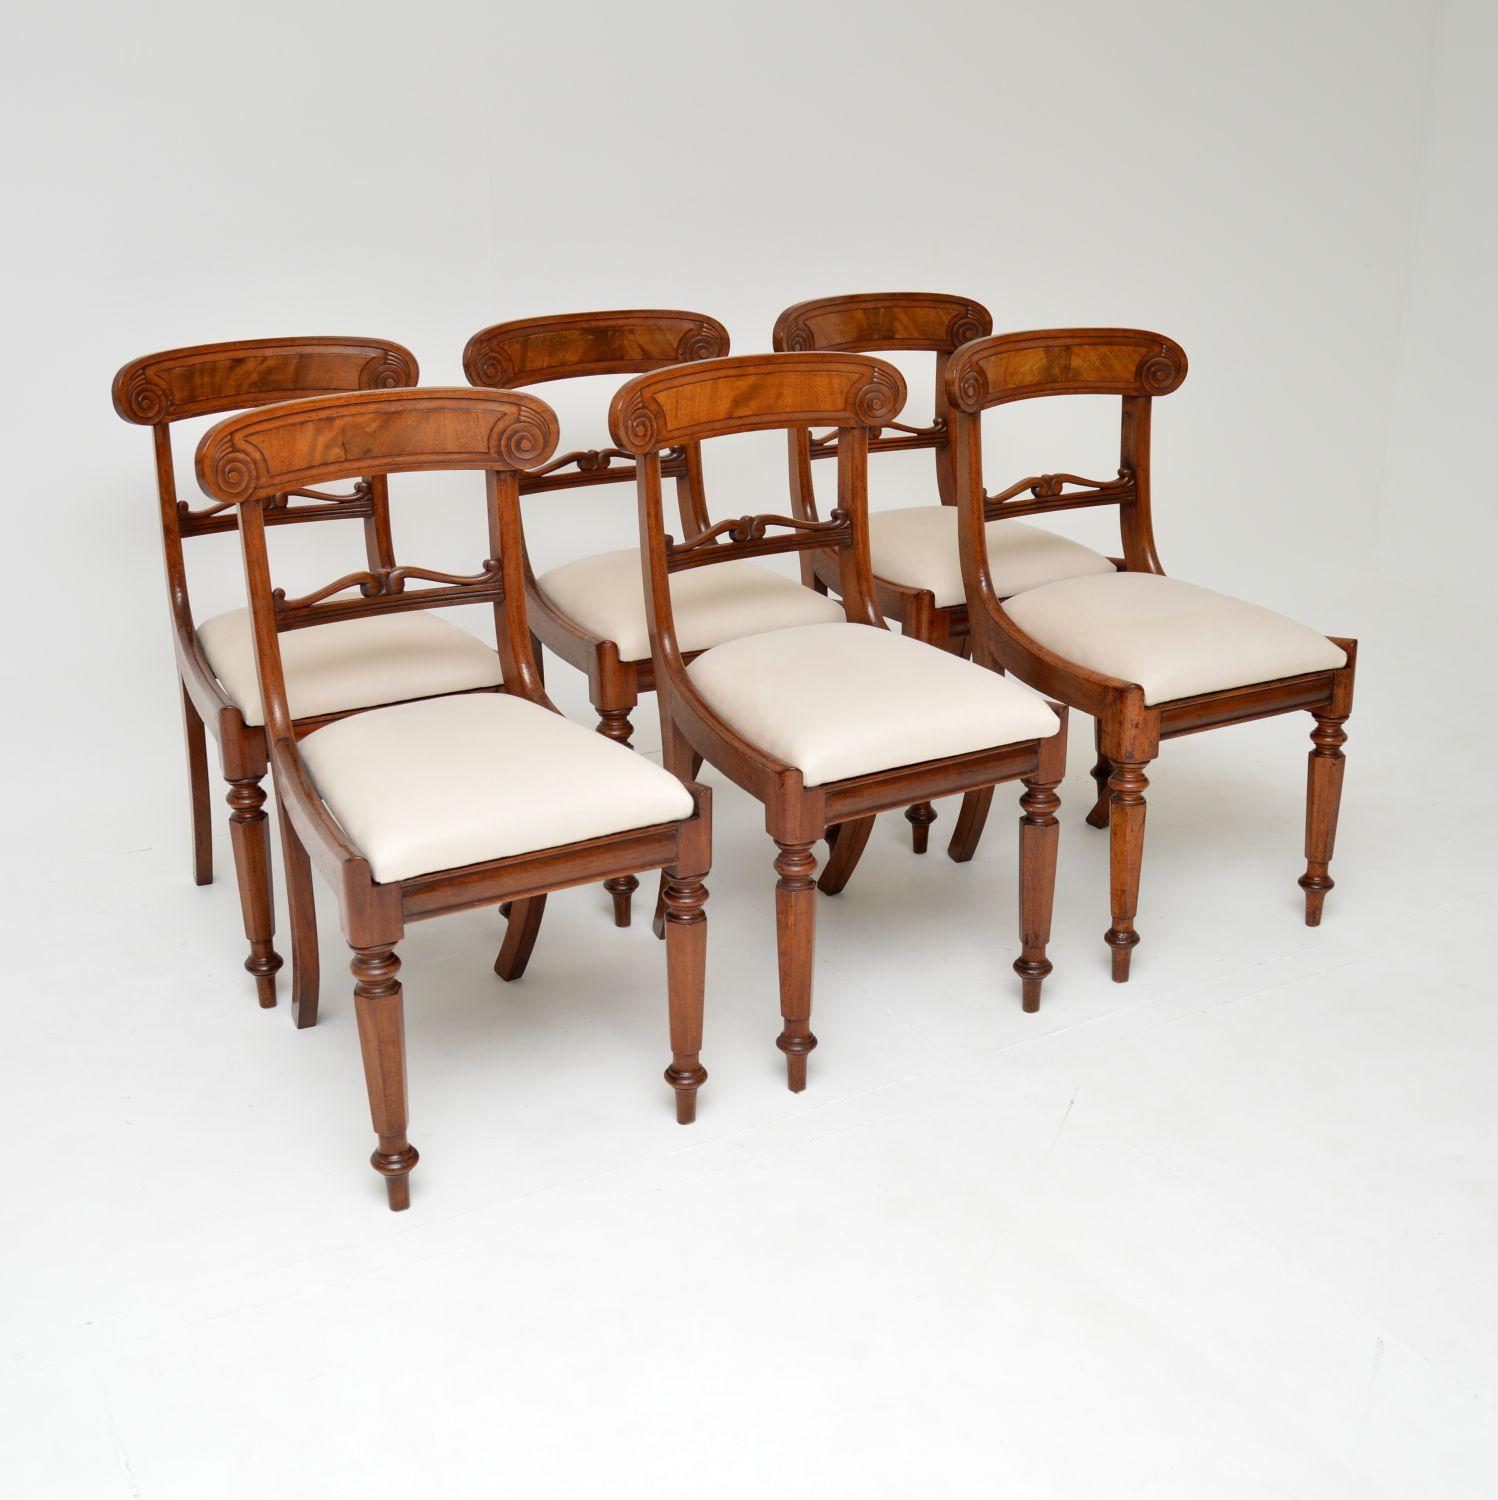 A fantastic set of original William IV period dining chairs. They were made in England, and date from the 1830-1840’s.

The quality is outstanding, they are a beautiful designed example of chairs from the period. The Trafalgar backs have lovely